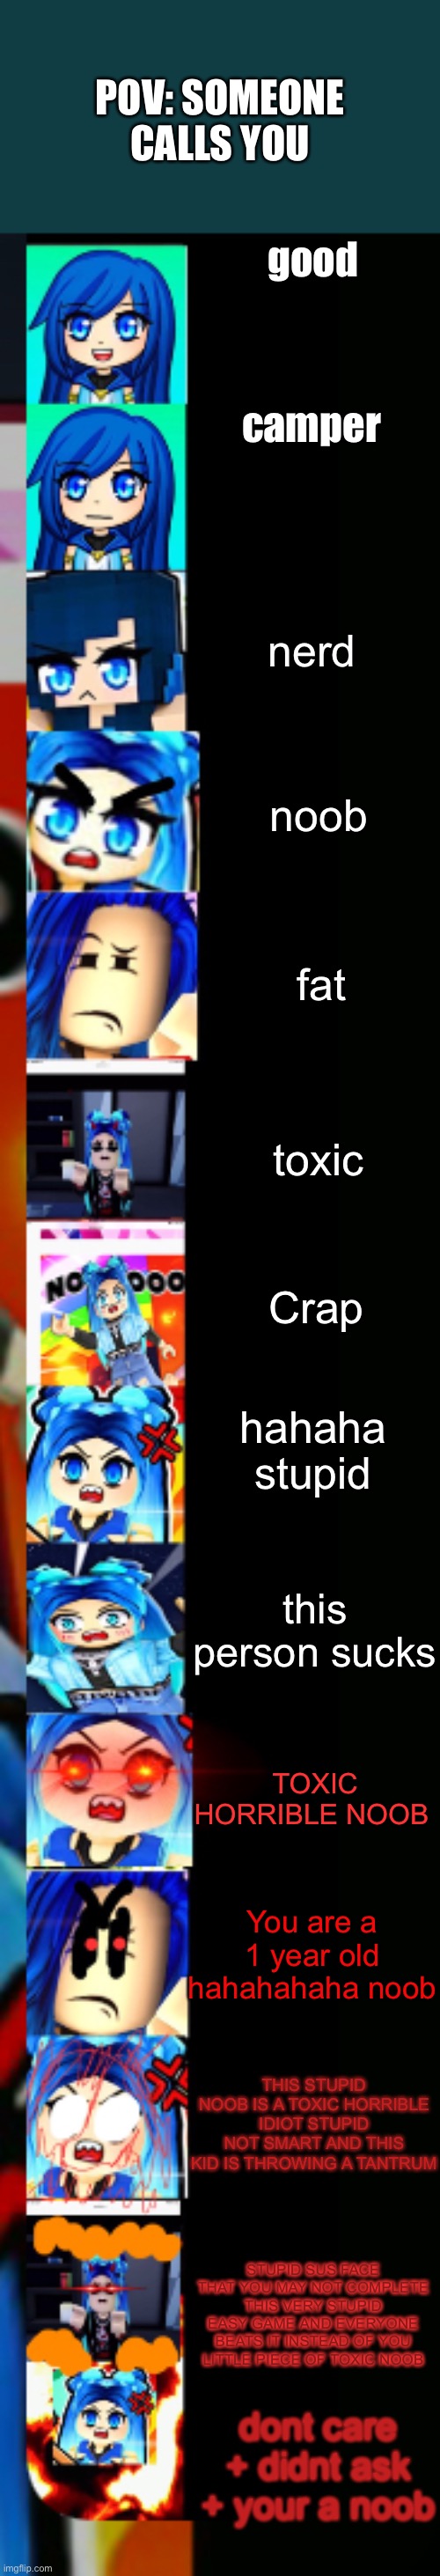 ItsFunneh Becoming Angry Extended | POV: SOMEONE CALLS YOU; good; camper; nerd; noob; fat; toxic; Crap; hahaha stupid; this person sucks; TOXIC HORRIBLE NOOB; You are a 1 year old hahahahaha noob; THIS STUPID NOOB IS A TOXIC HORRIBLE IDIOT STUPID NOT SMART AND THIS KID IS THROWING A TANTRUM; STUPID SUS FACE THAT YOU MAY NOT COMPLETE THIS VERY STUPID EASY GAME AND EVERYONE BEATS IT INSTEAD OF YOU LITTLE PIECE OF TOXIC NOOB; dont care + didnt ask + your a noob | image tagged in itsfunneh becoming angry extended | made w/ Imgflip meme maker